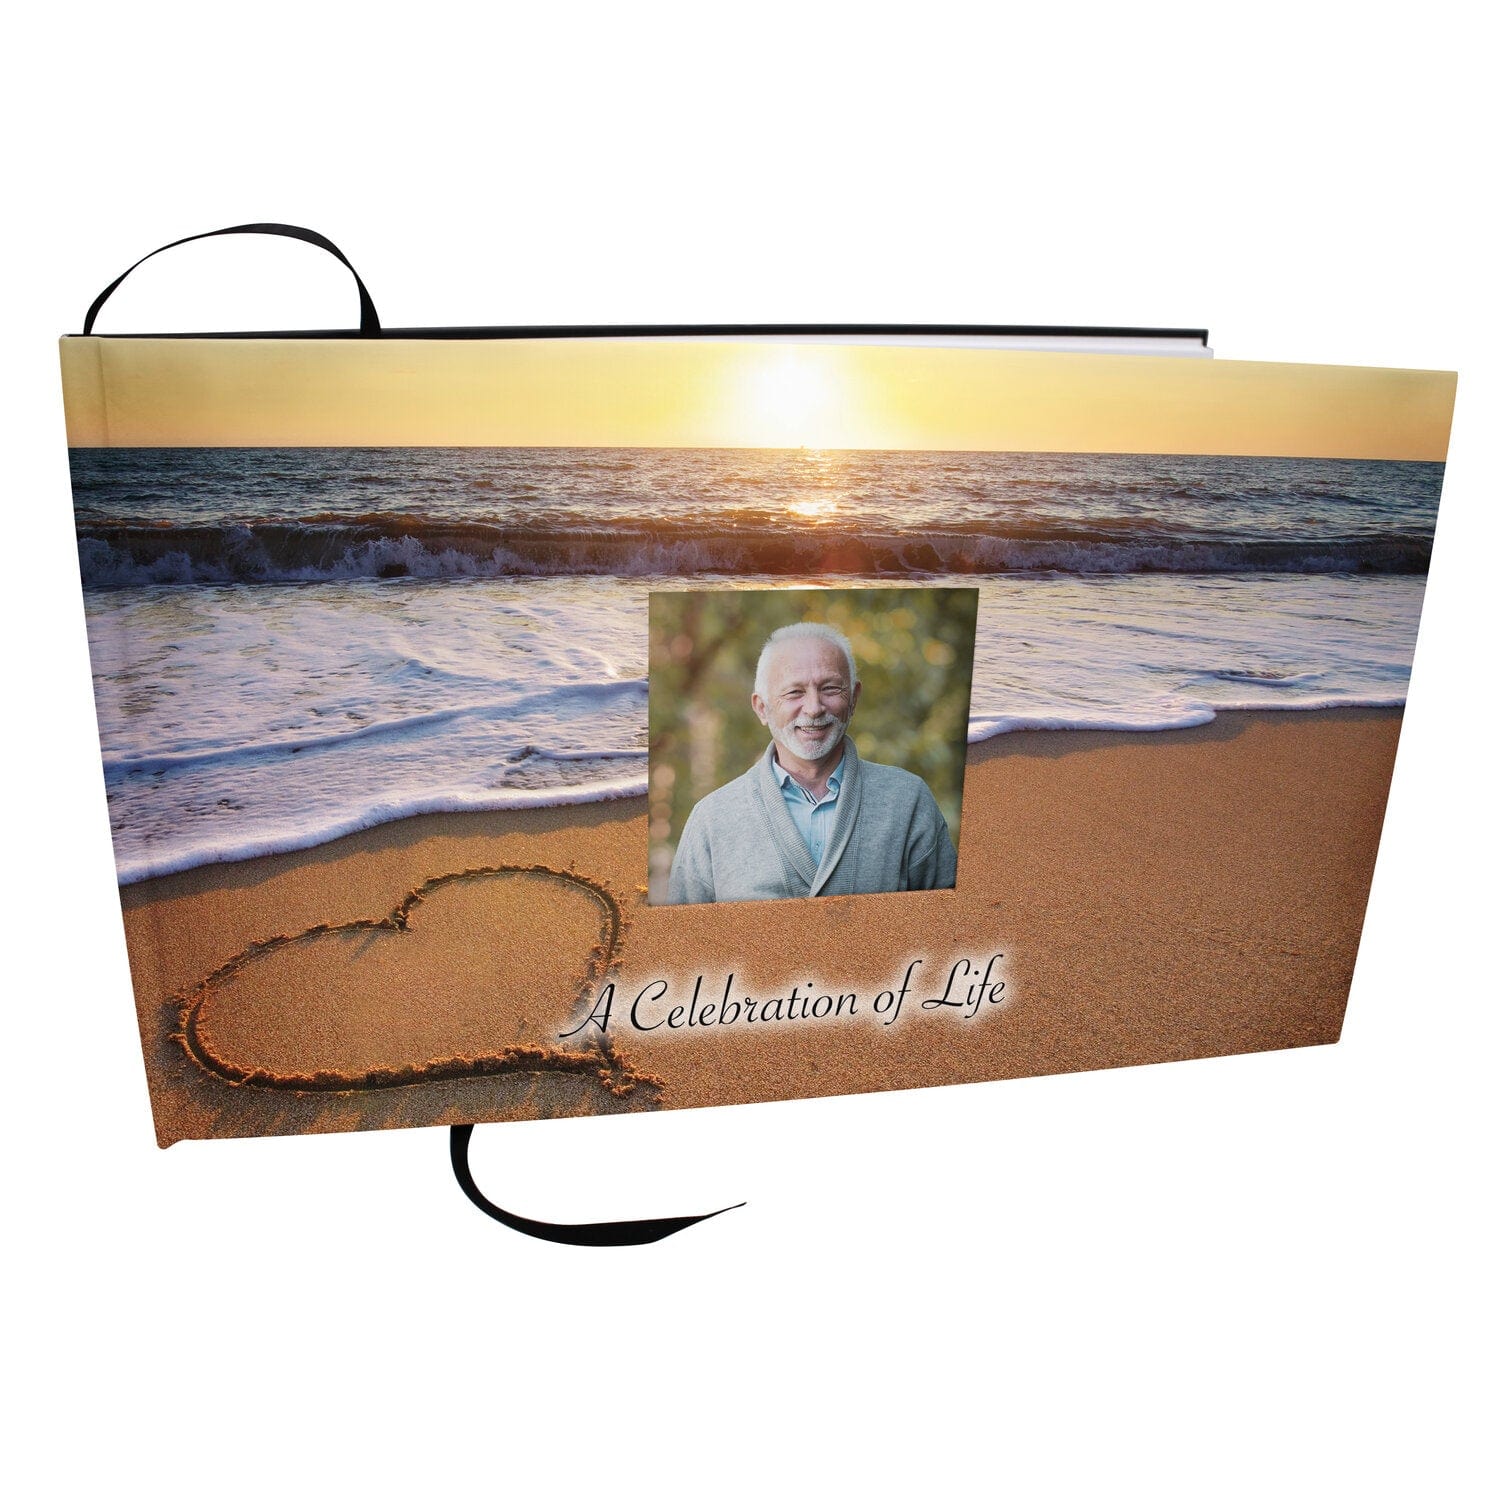 Commemorative Cremation Urns Home & Garden Endless Summer Matching Themed 'Celebration of Life' Guest Book for Funeral or Memorial Service